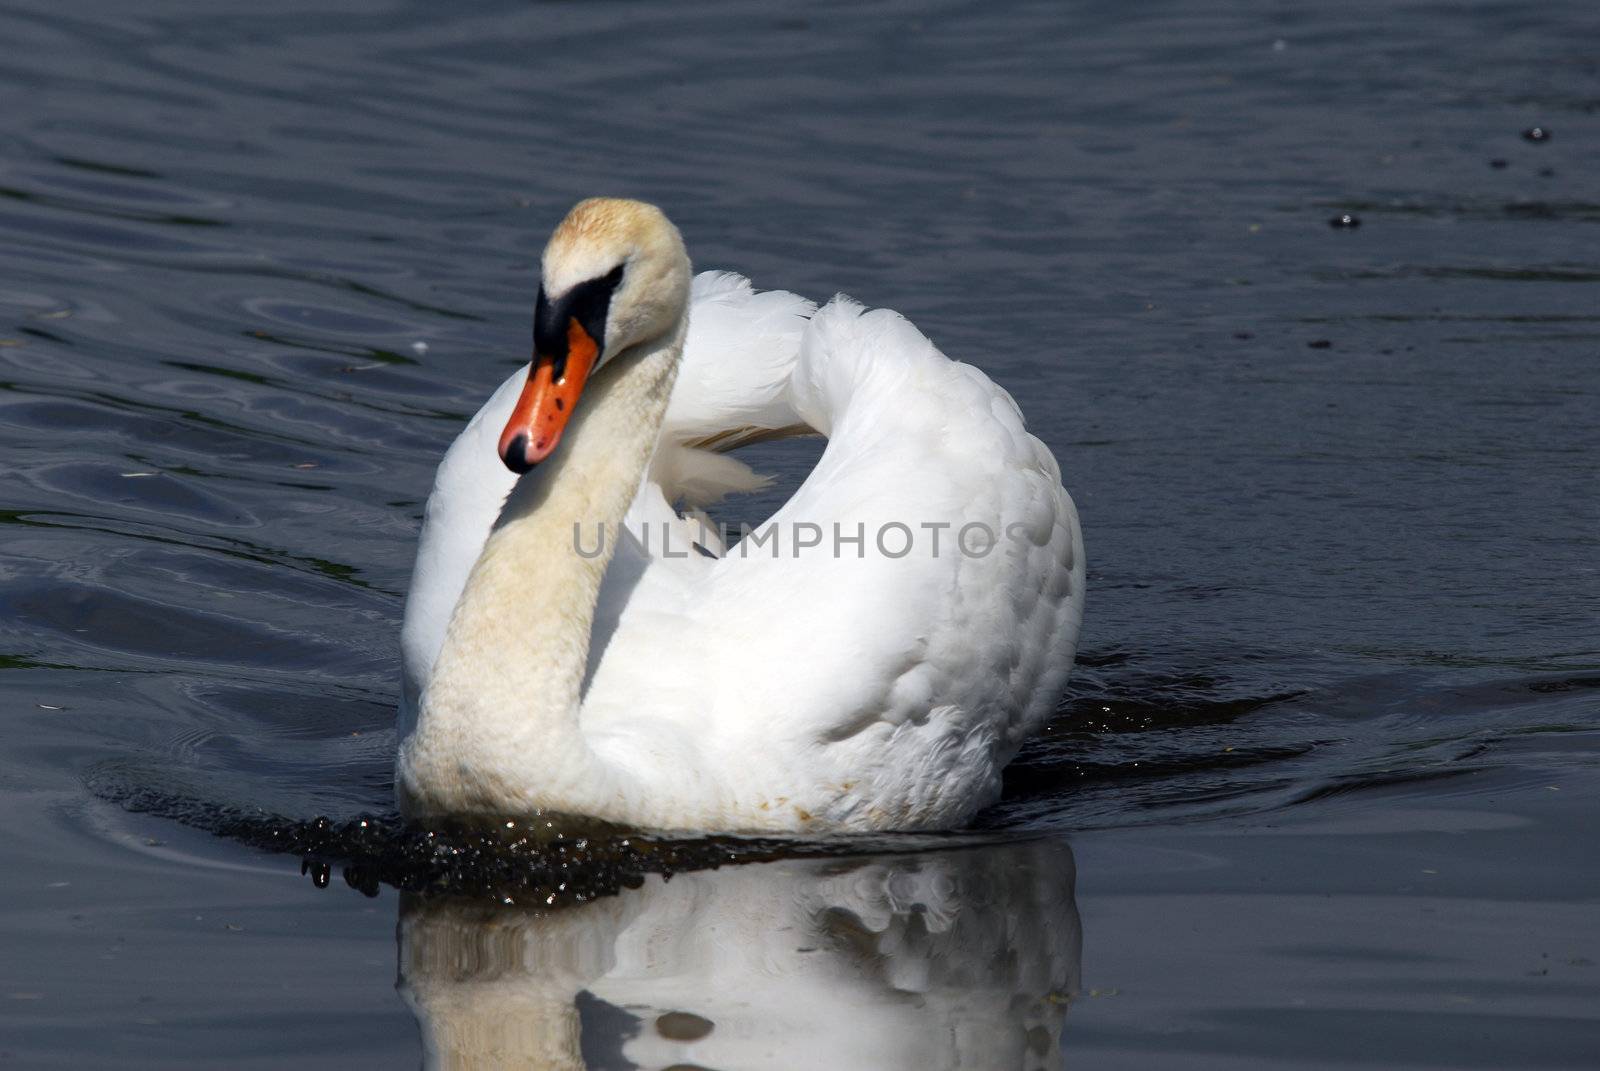 Closeup picture of a beautiful White Swan swimming